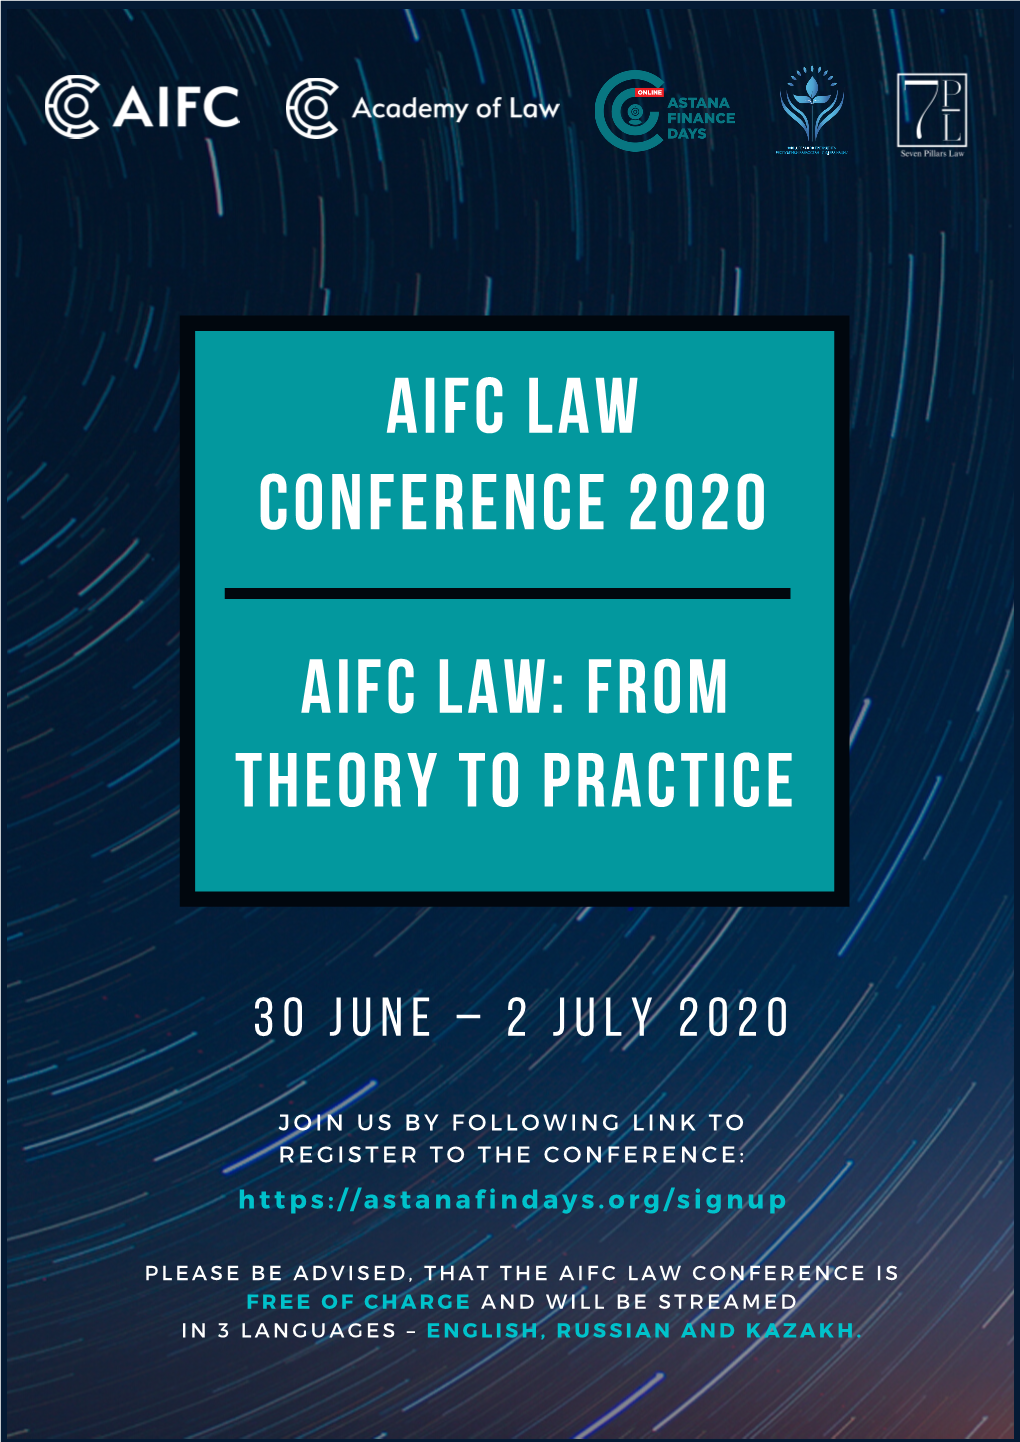 AIFC Law Conference 2020